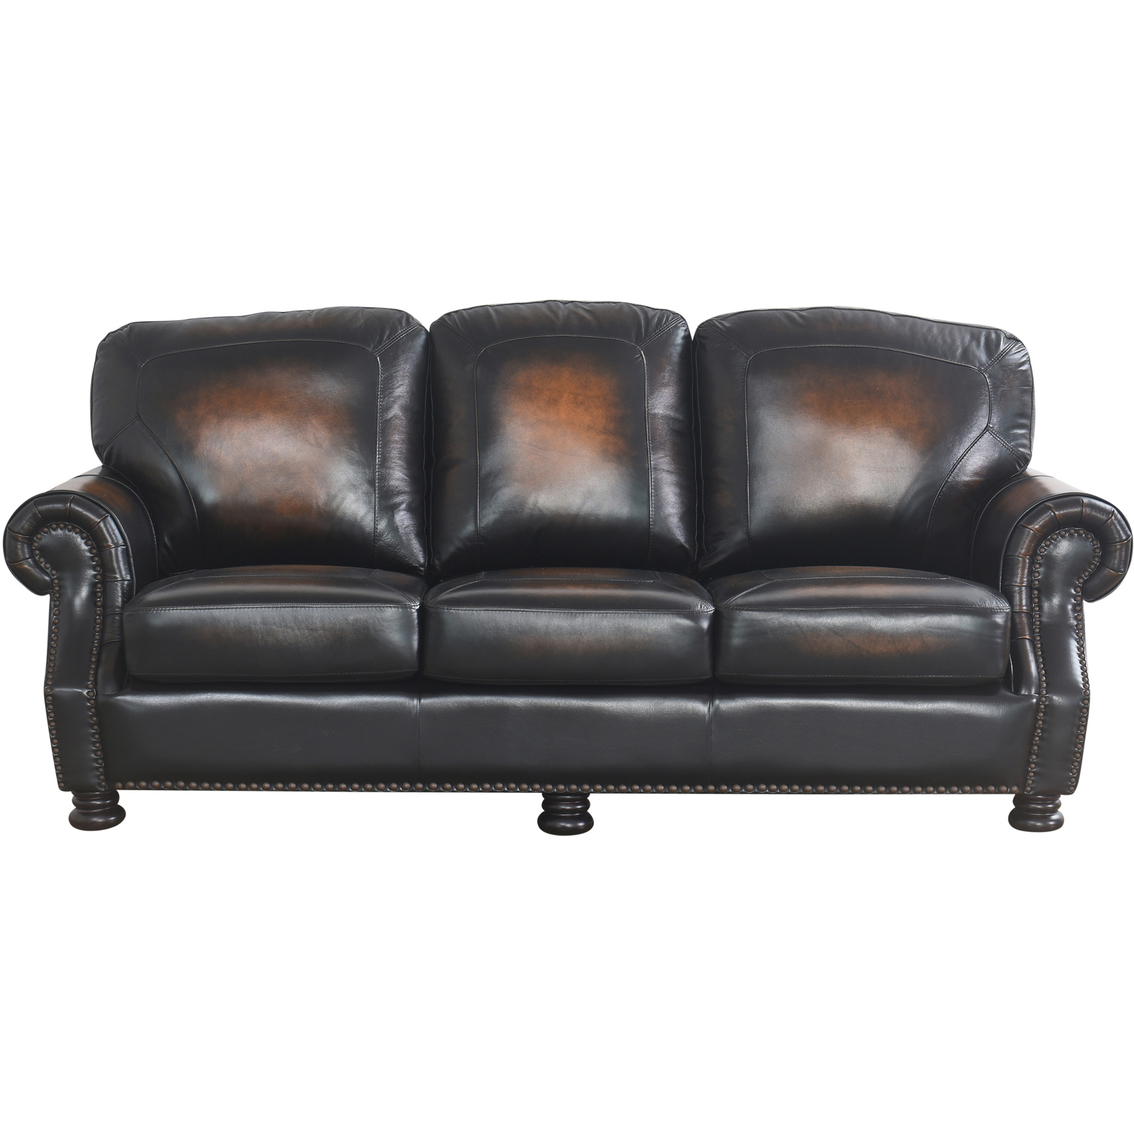 Abbyson Saticoy Hand Rubbed Leather, Abbyson Leather Sectional